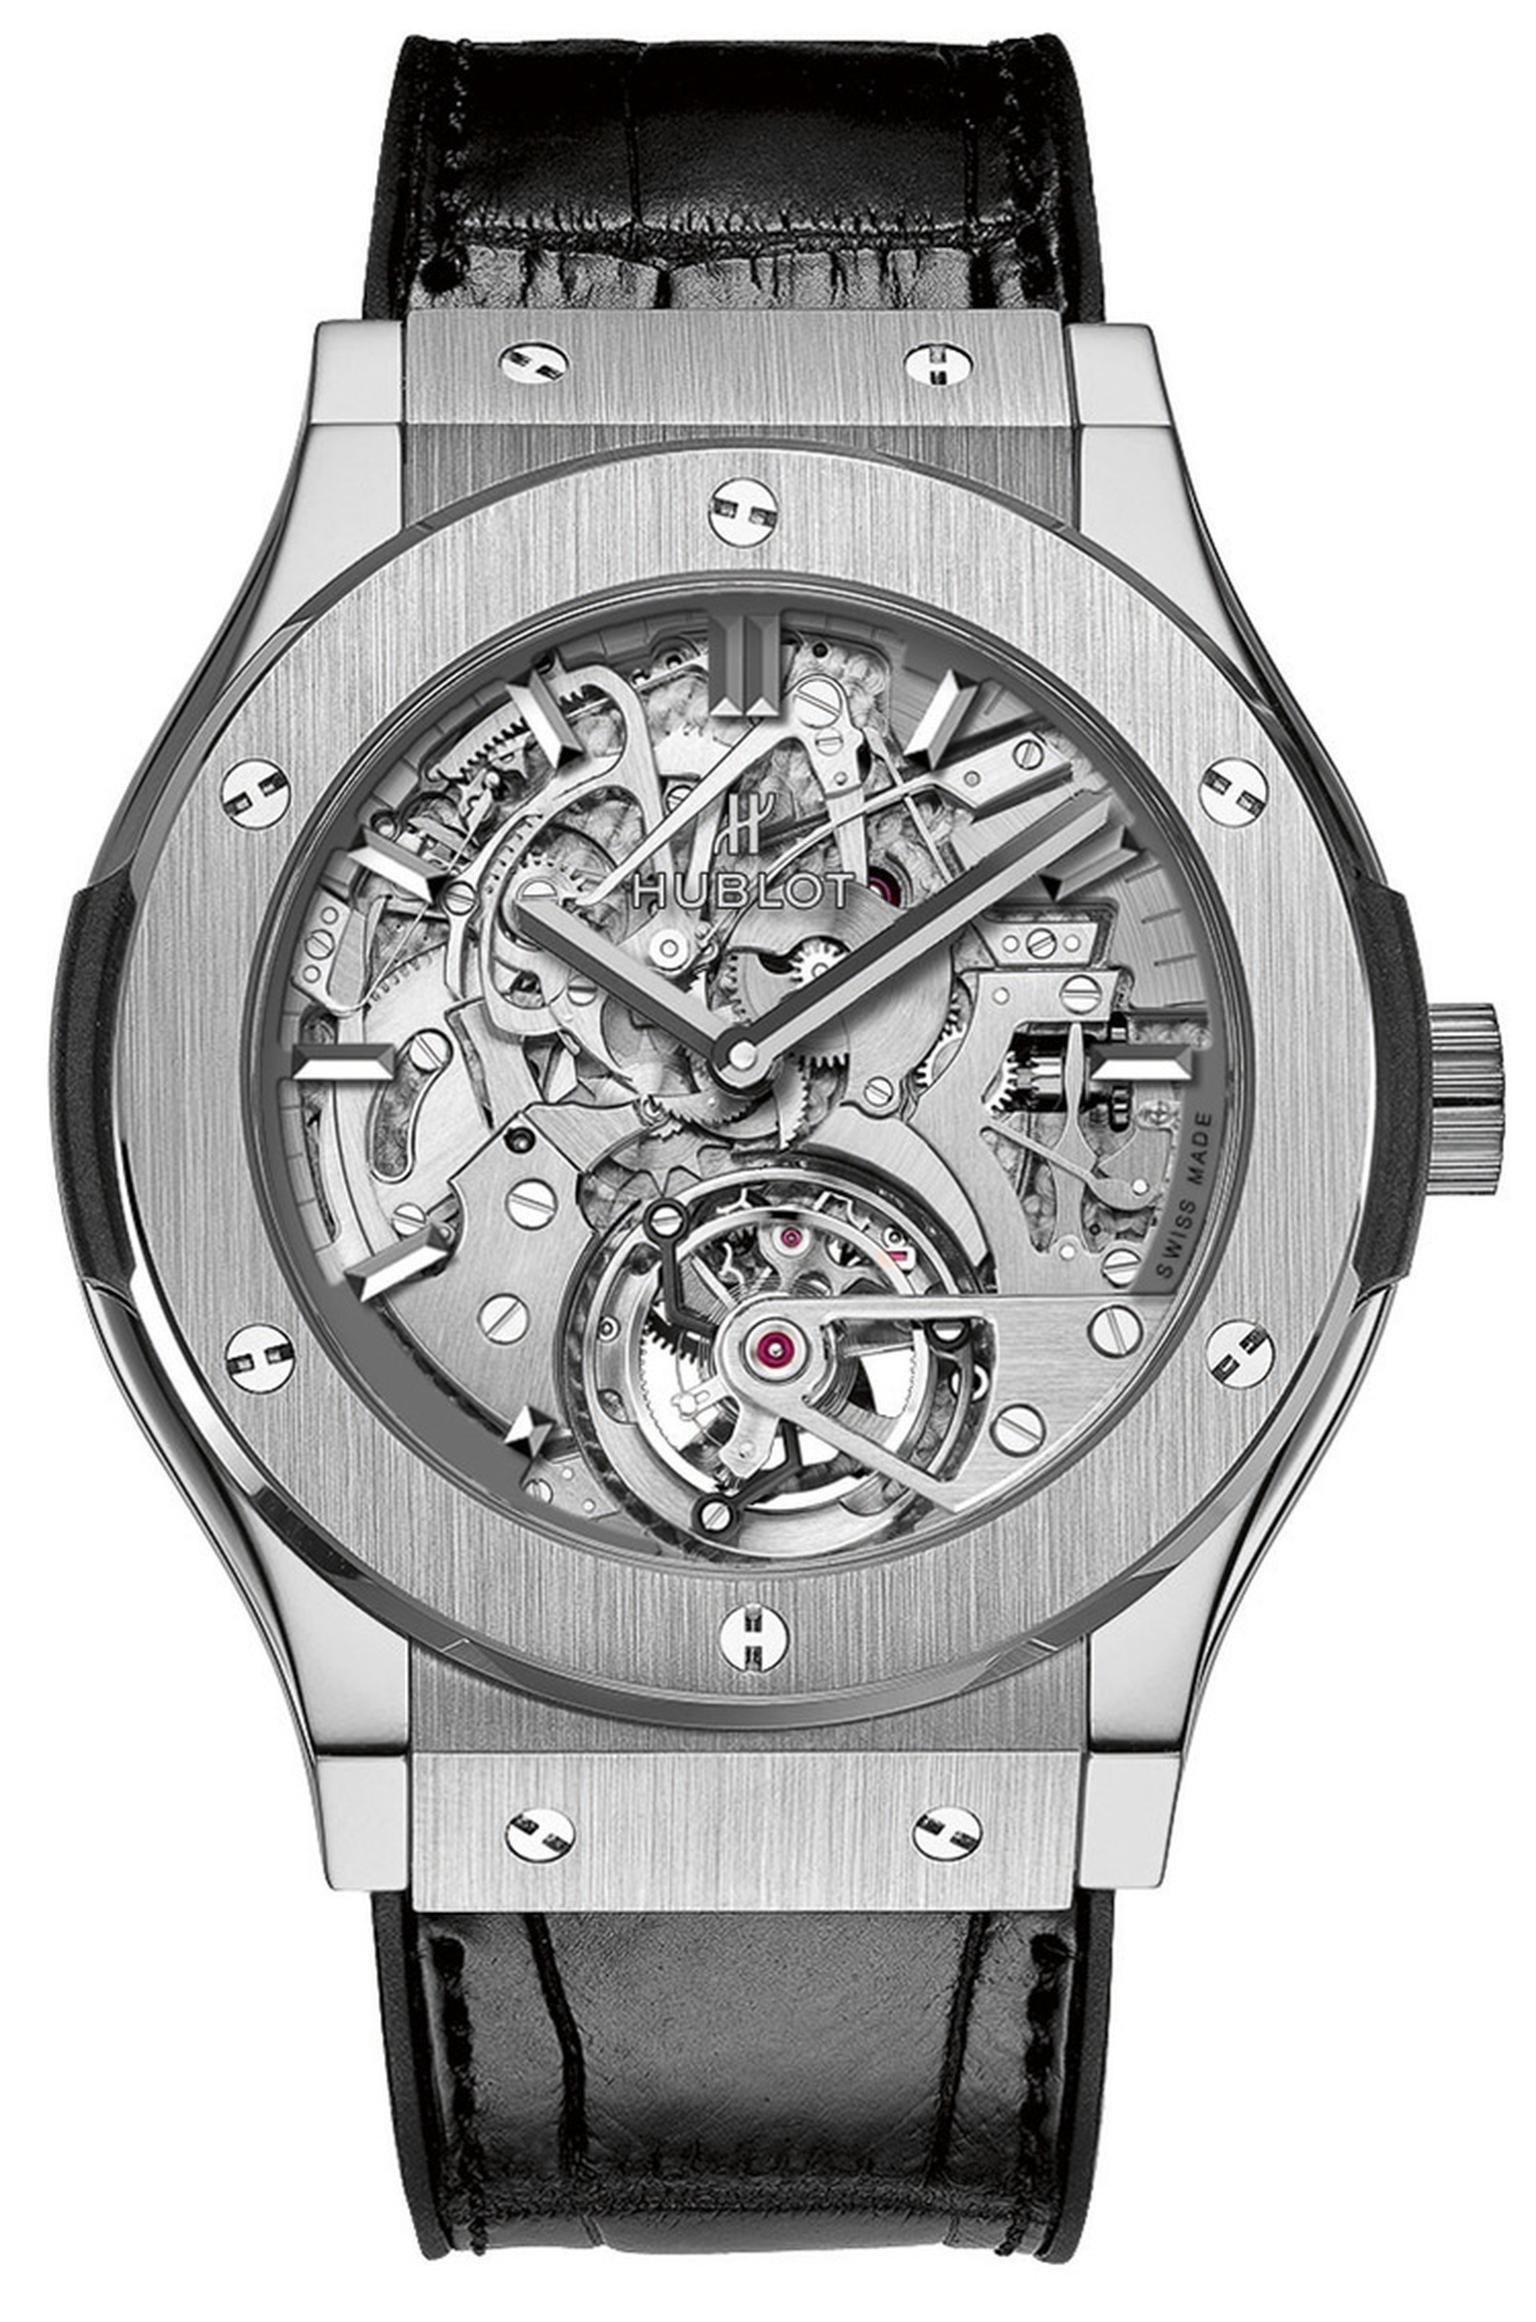 Hublot's Classic Fusion Cathedral Tourbillon Minute Repeater watch took home the Striking Watch prize at the GPHG.